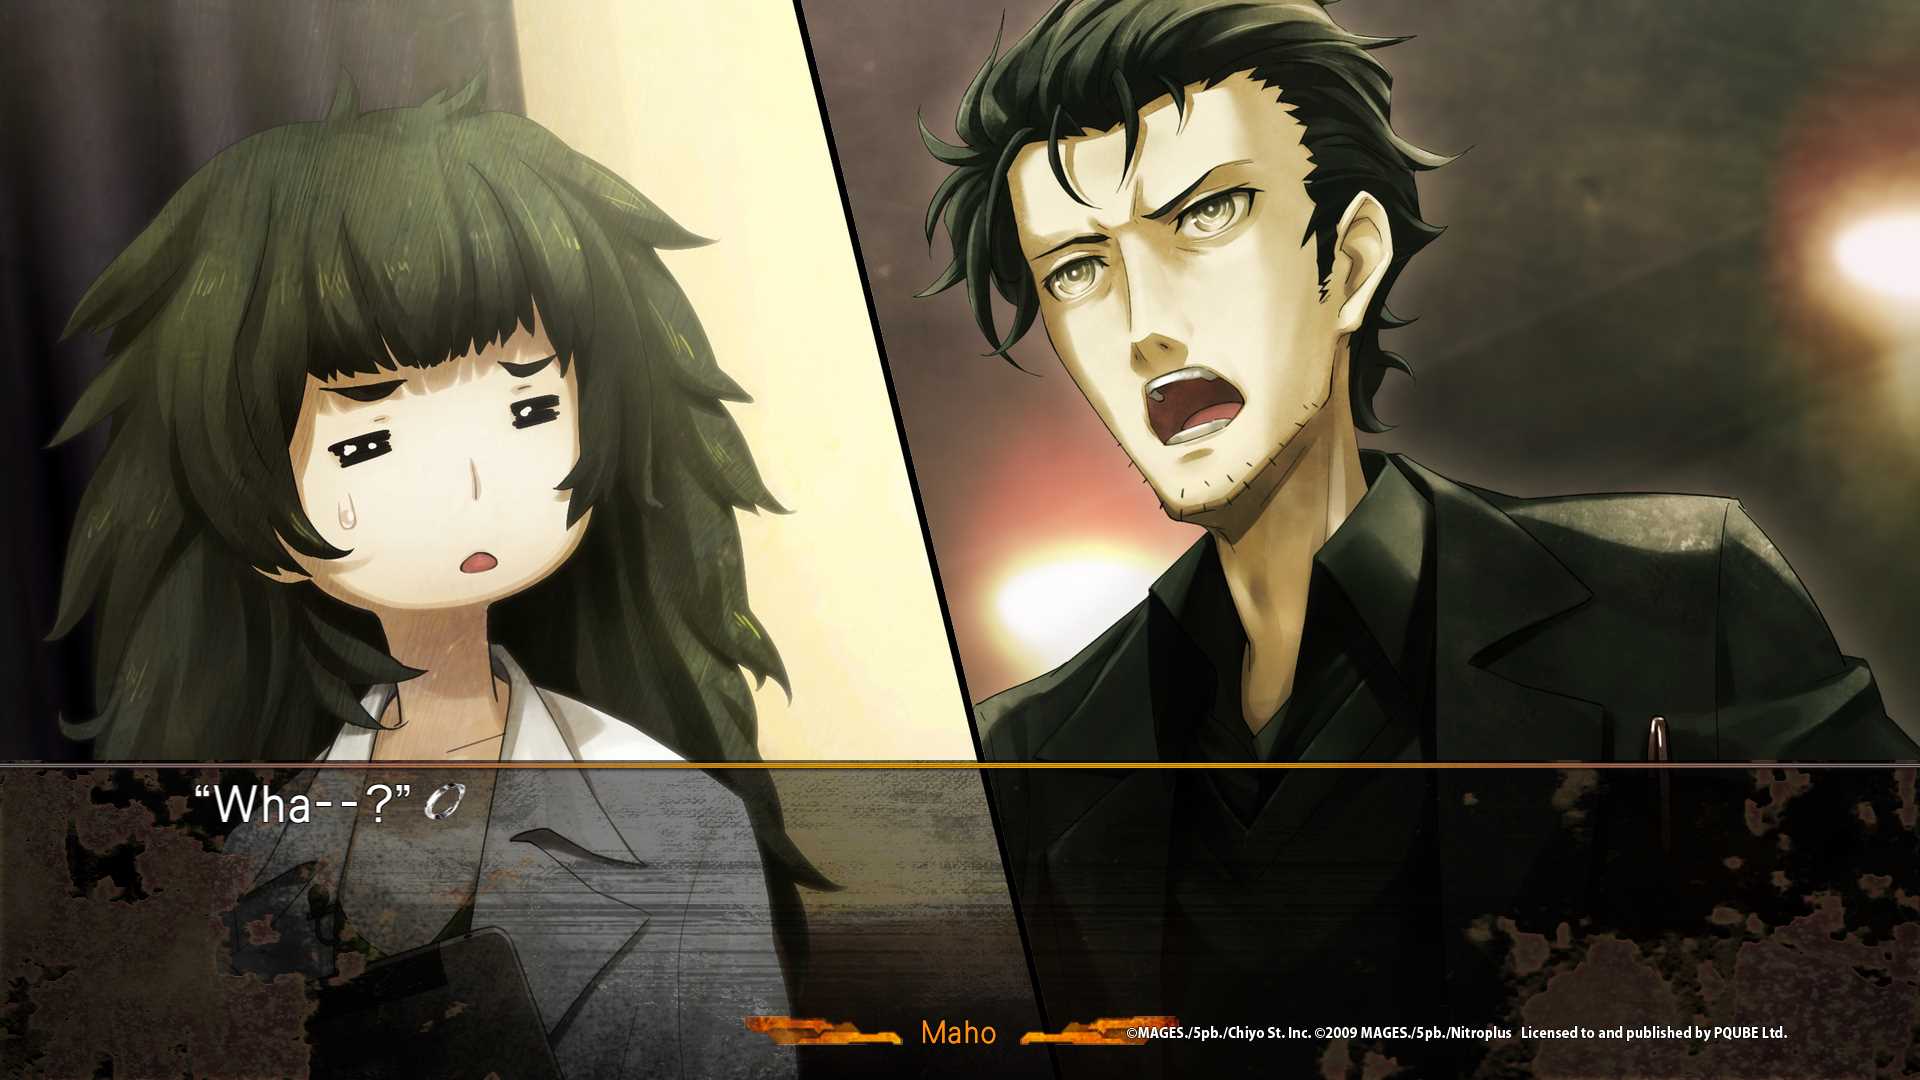 Steins gate 0 ending quote